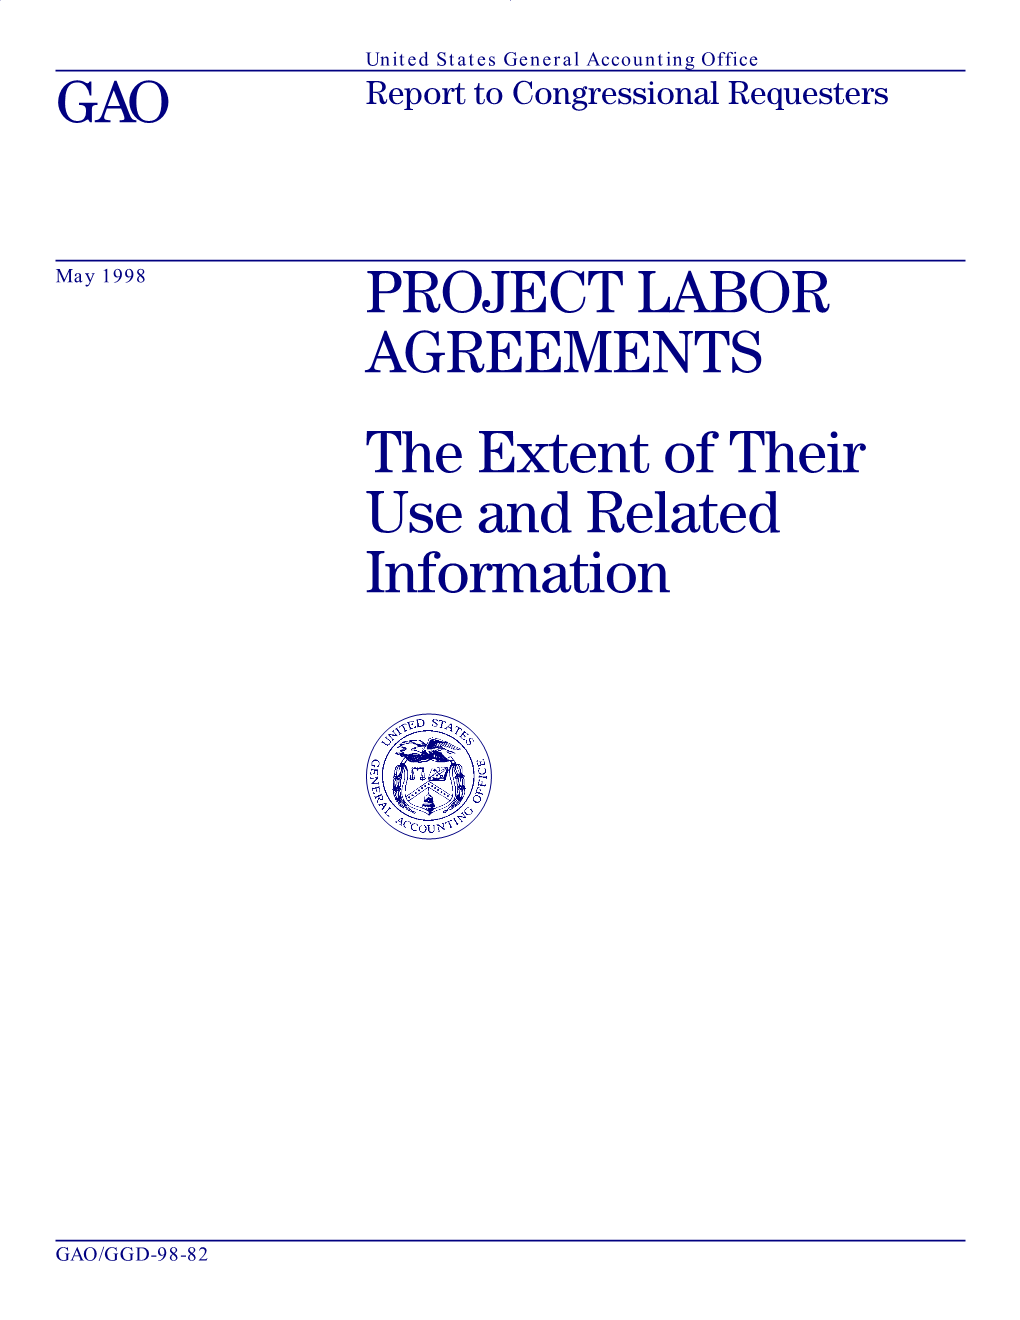 GGD-98-82 Project Labor Agreements B-277866